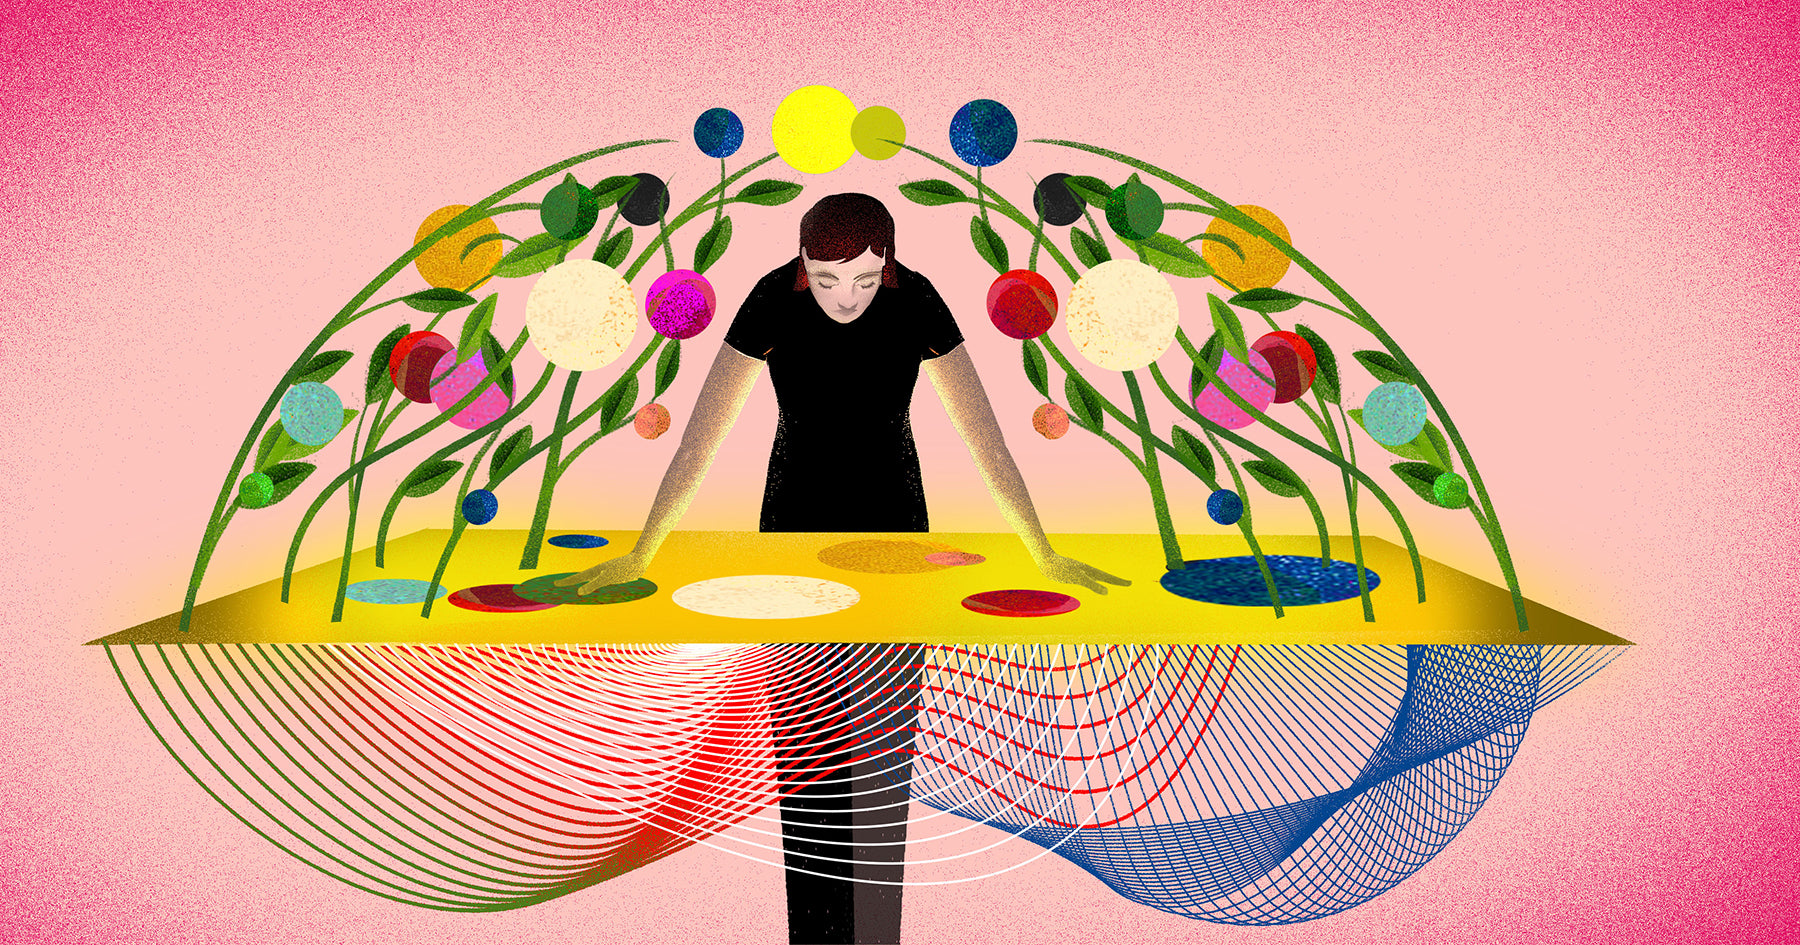 Illustration representing the creator economy: a person leans over a table while colourful shapes grow around them